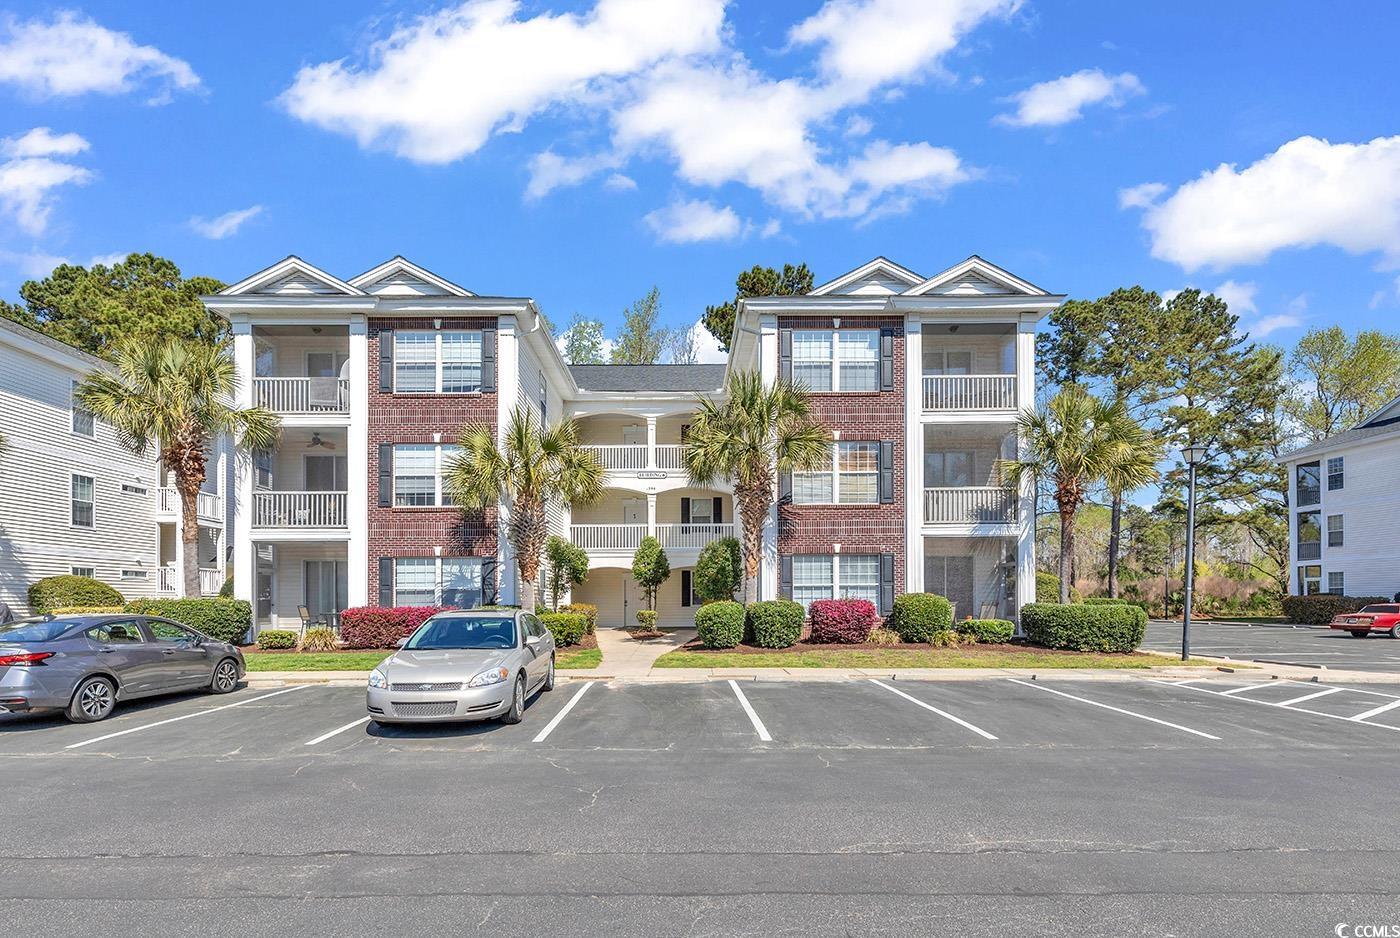 open house! join us this saturday, april 27, 2024 from 12:00 pm to 3:00 pm for an open house at 1294 river oaks drive, unit 6i, myrtle beach. this two bedroom, two bathroom condo in fairways at river oaks is close to the beach and allows short term rentals! you have to see this great opportunity today! great opportunity now available at beautiful fairways at river oaks! this community enjoys a gorgeous pool, spa and picnic area with close proximity to area beaches and award winning golf. this 2 bedroom, 2 bathroom unit on the second floor has a screened backporch and convenient open concept living area. perfect option that offers short term rentals, long term rentals, and could be a great second home or primary residence. the options are endless with this tremendous condo! make sure to schedule your appointment today!